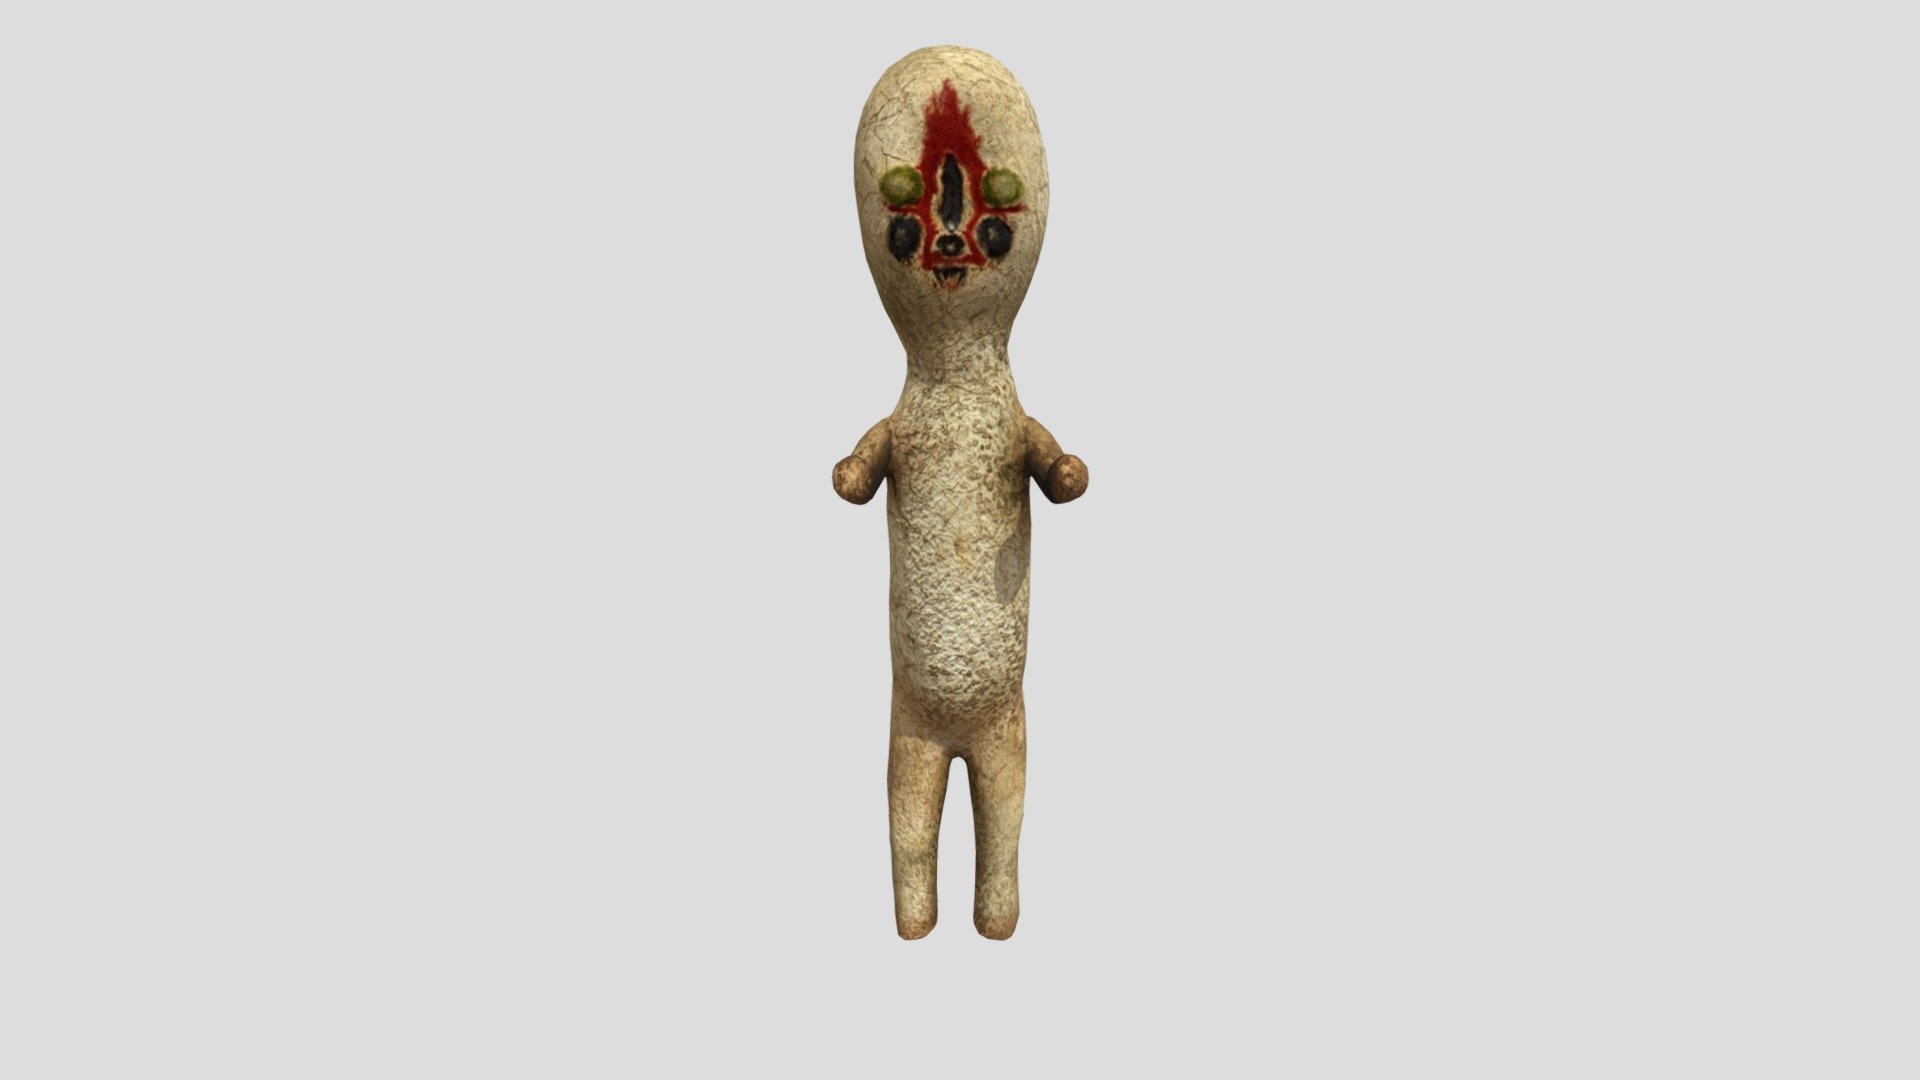 scp-173-download-free-3d-model-by-agent-alexjmason1995-87f9d14